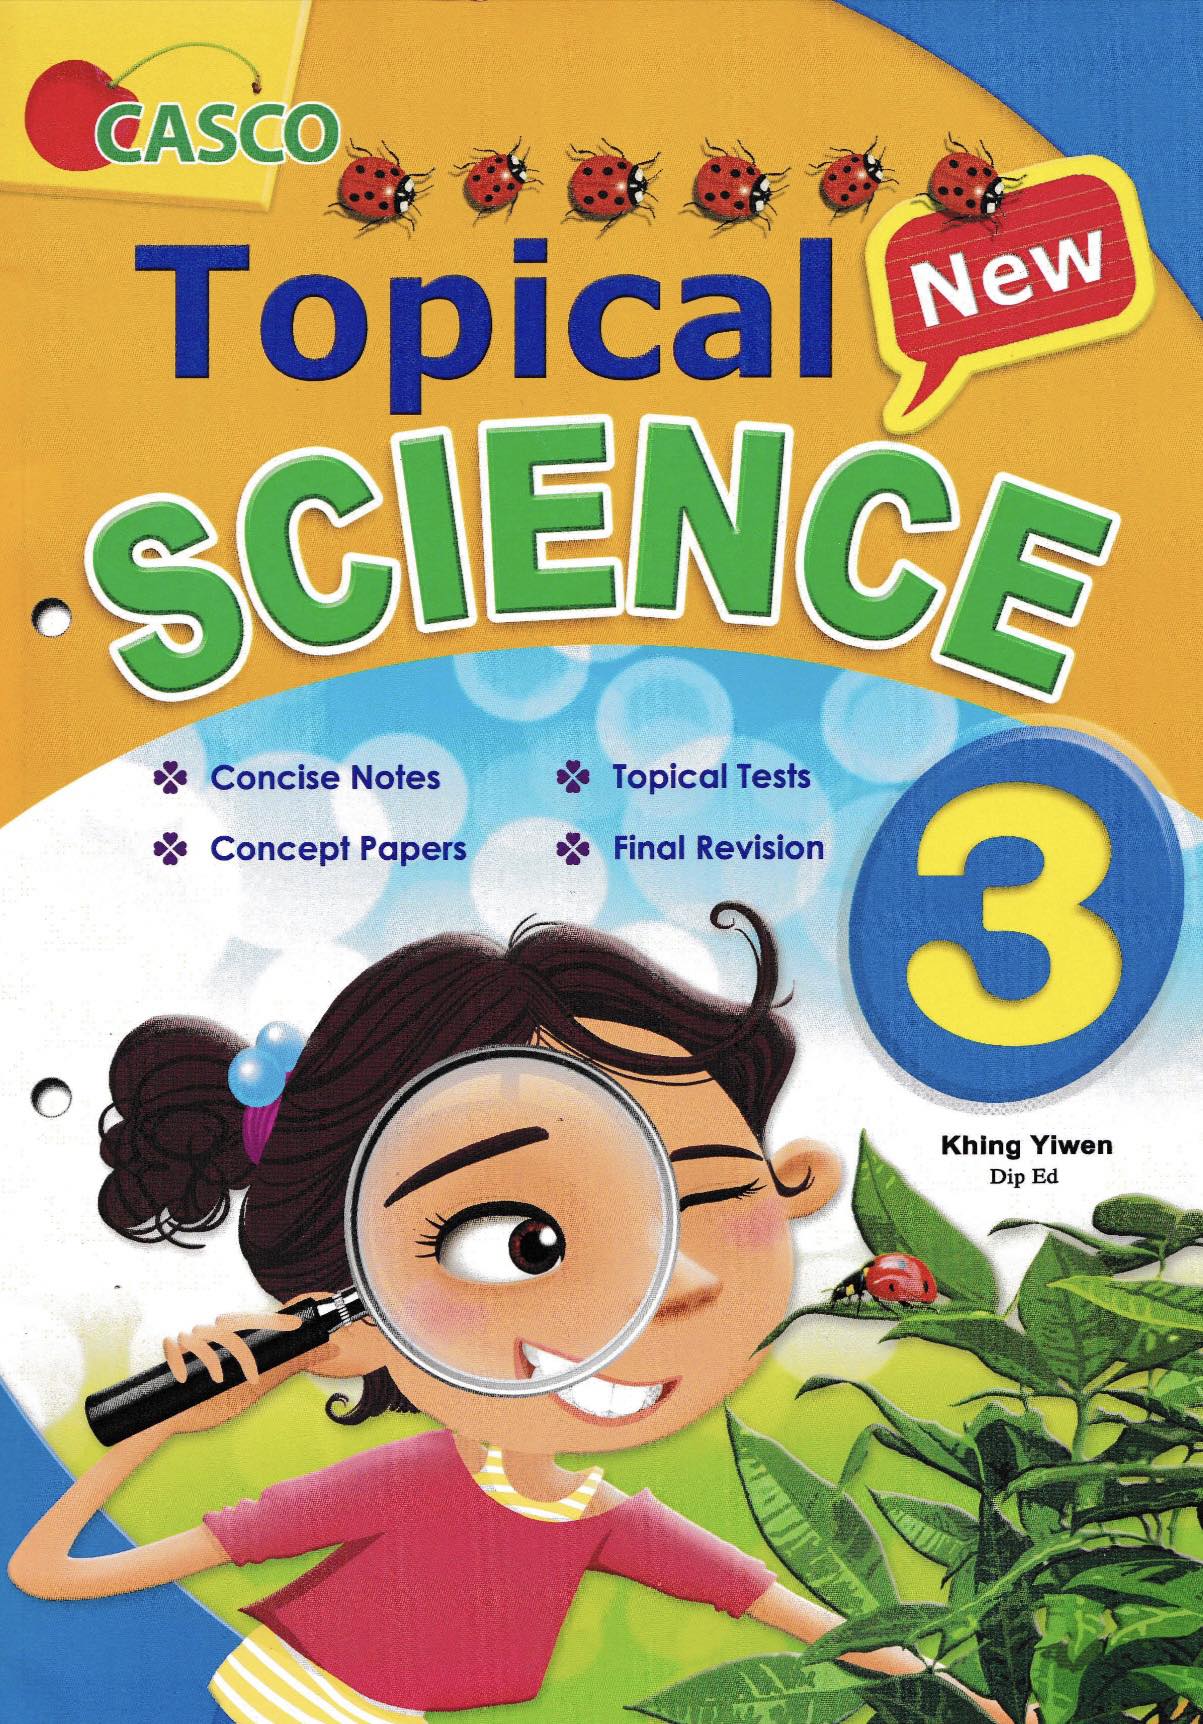 Topical New Science for Primary Levels